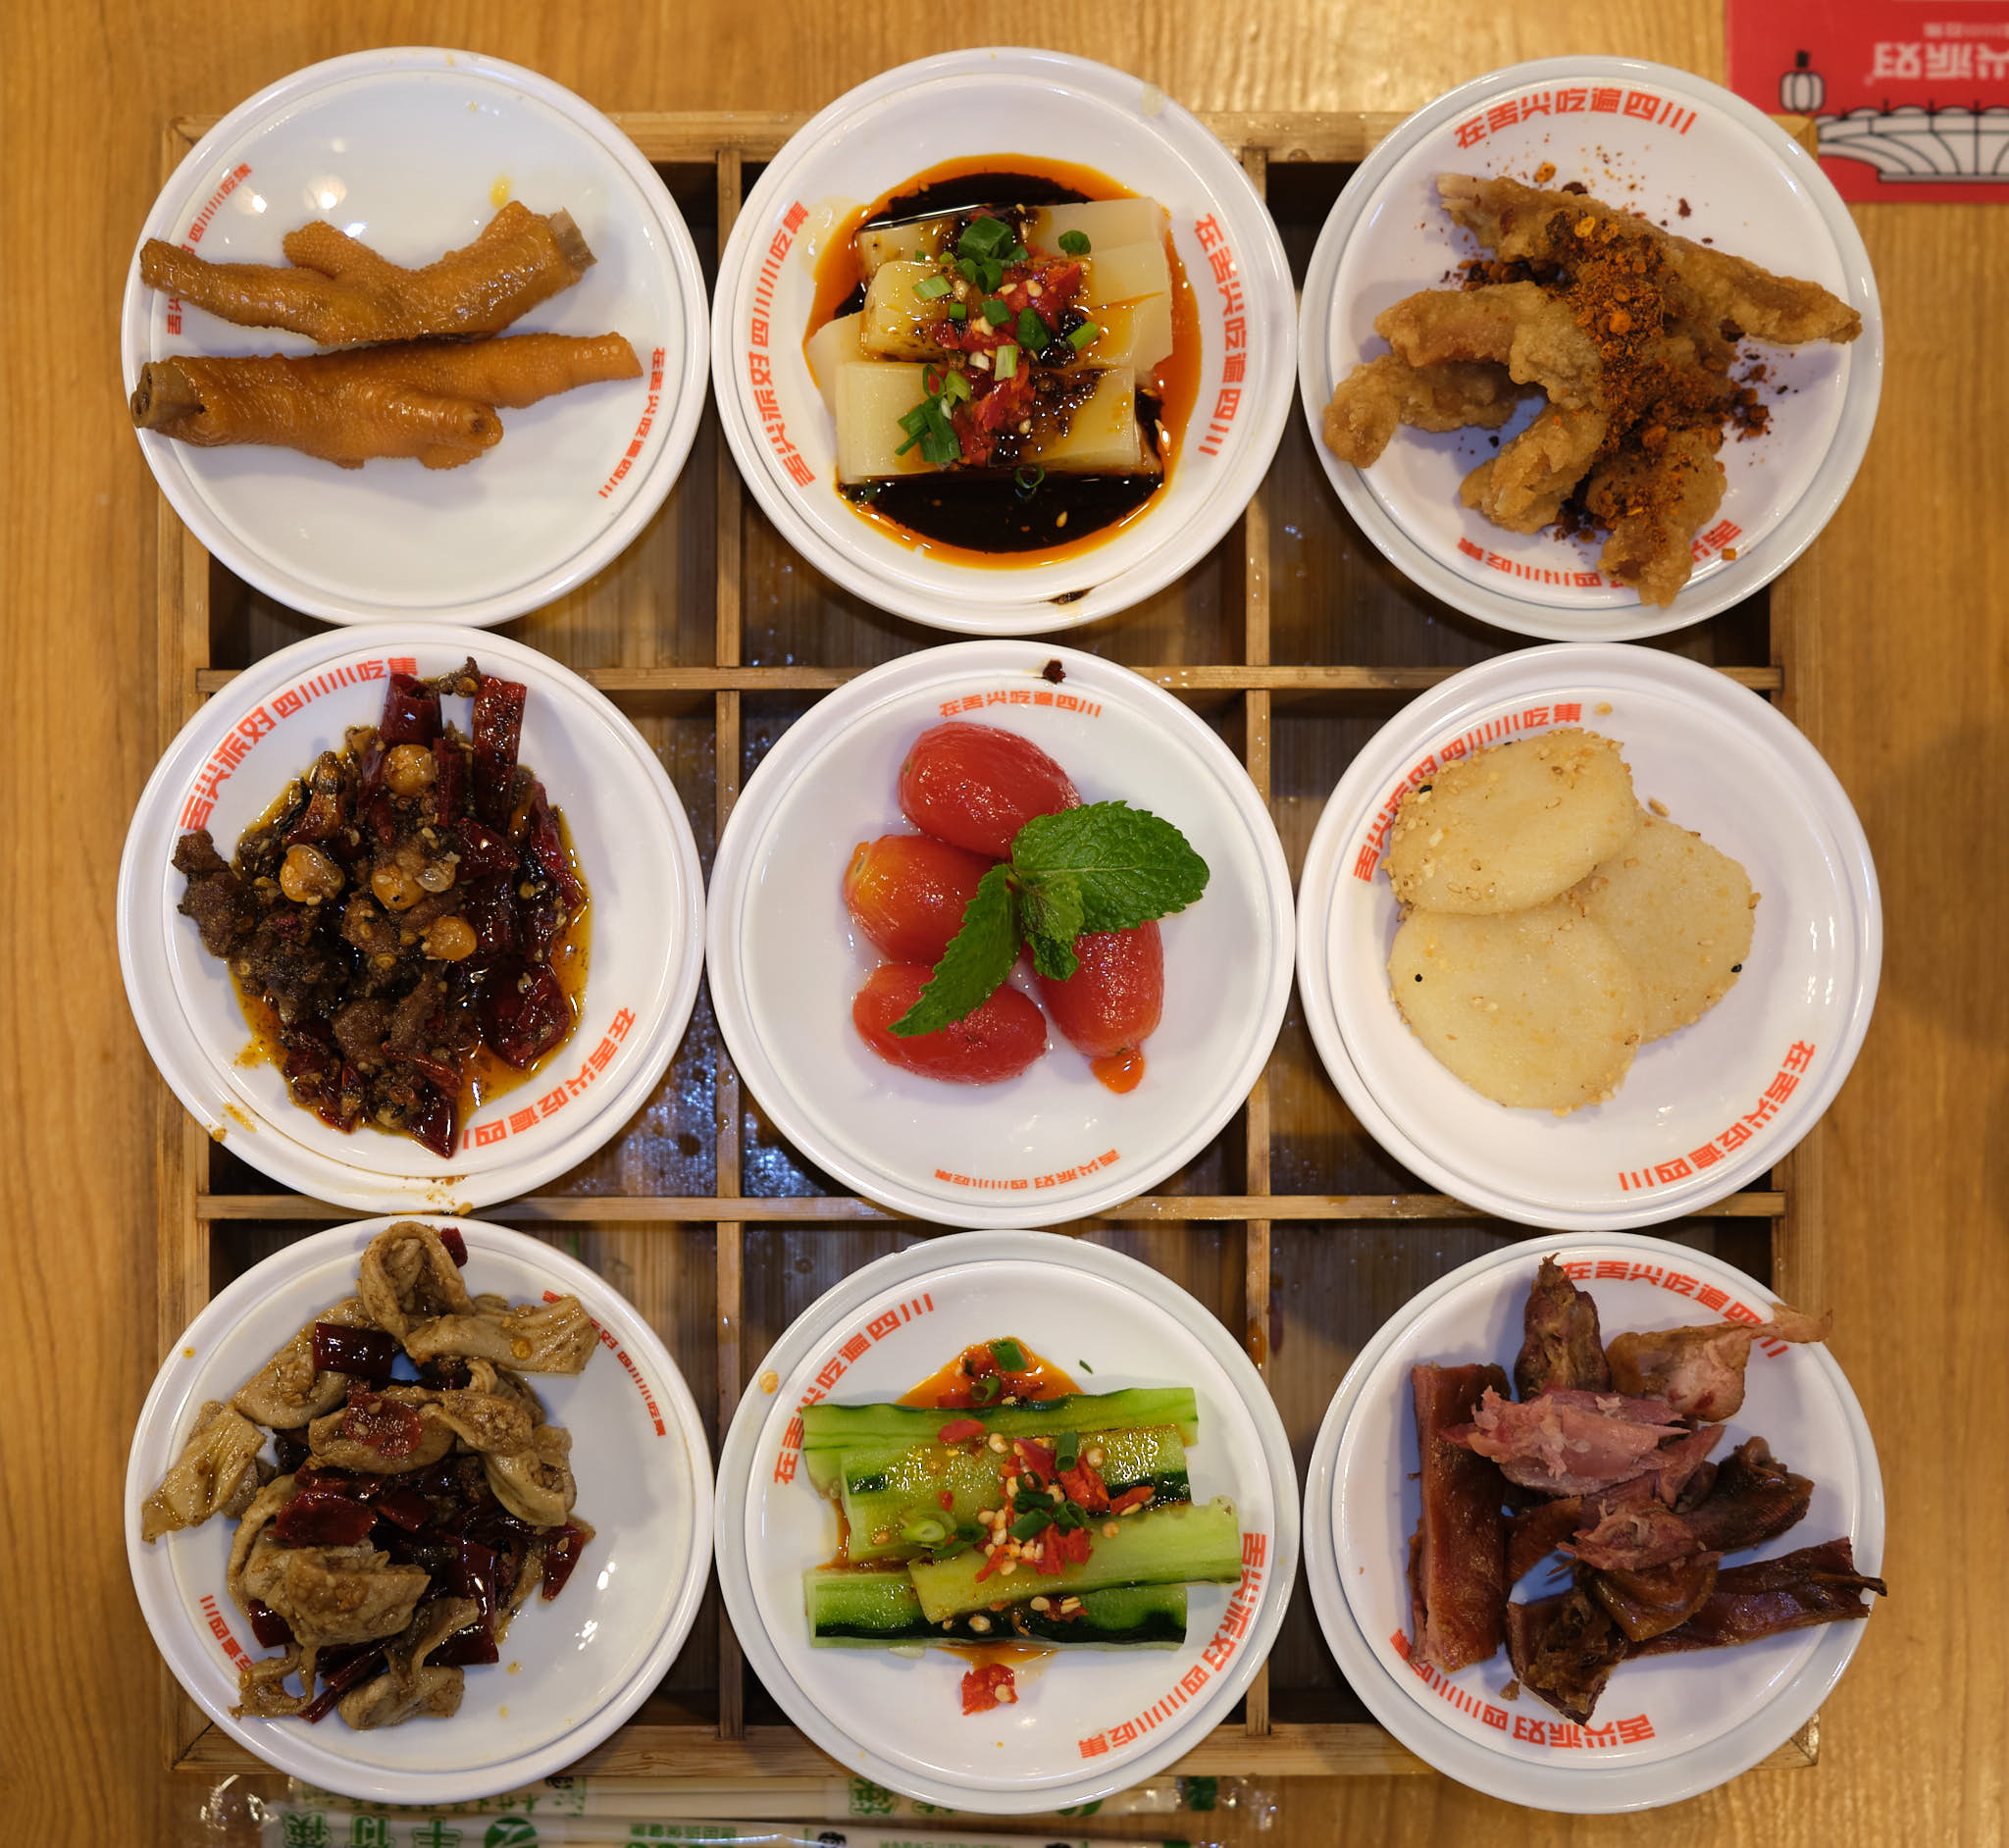 Nine types of local Chengdu food on a platter